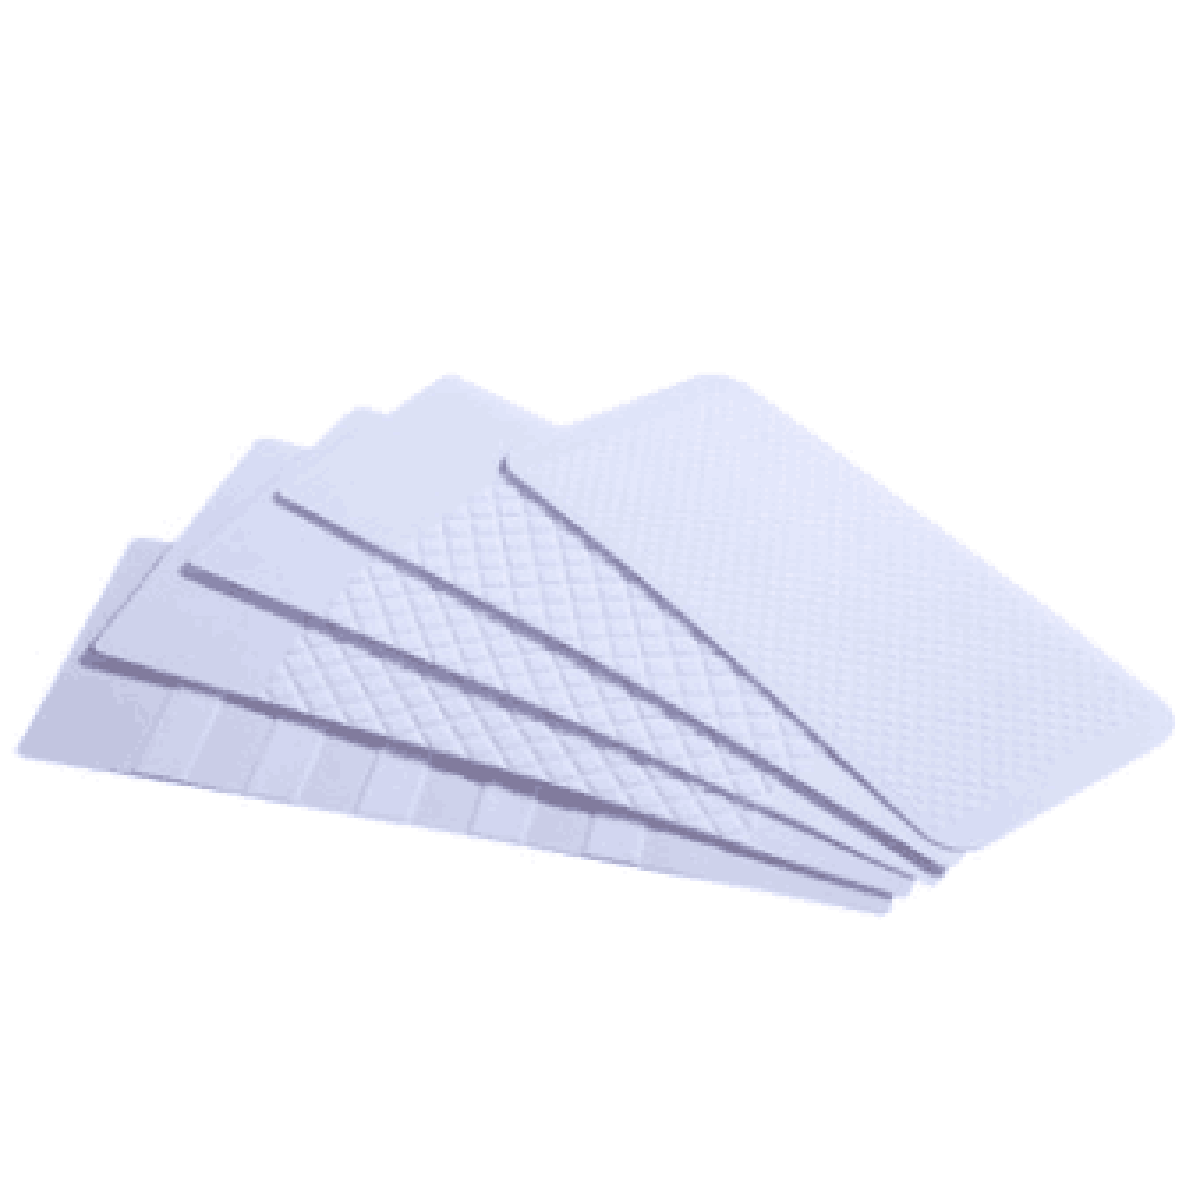 10pcs machine financial equipment flocking cleaning card 73x185m - Click Image to Close